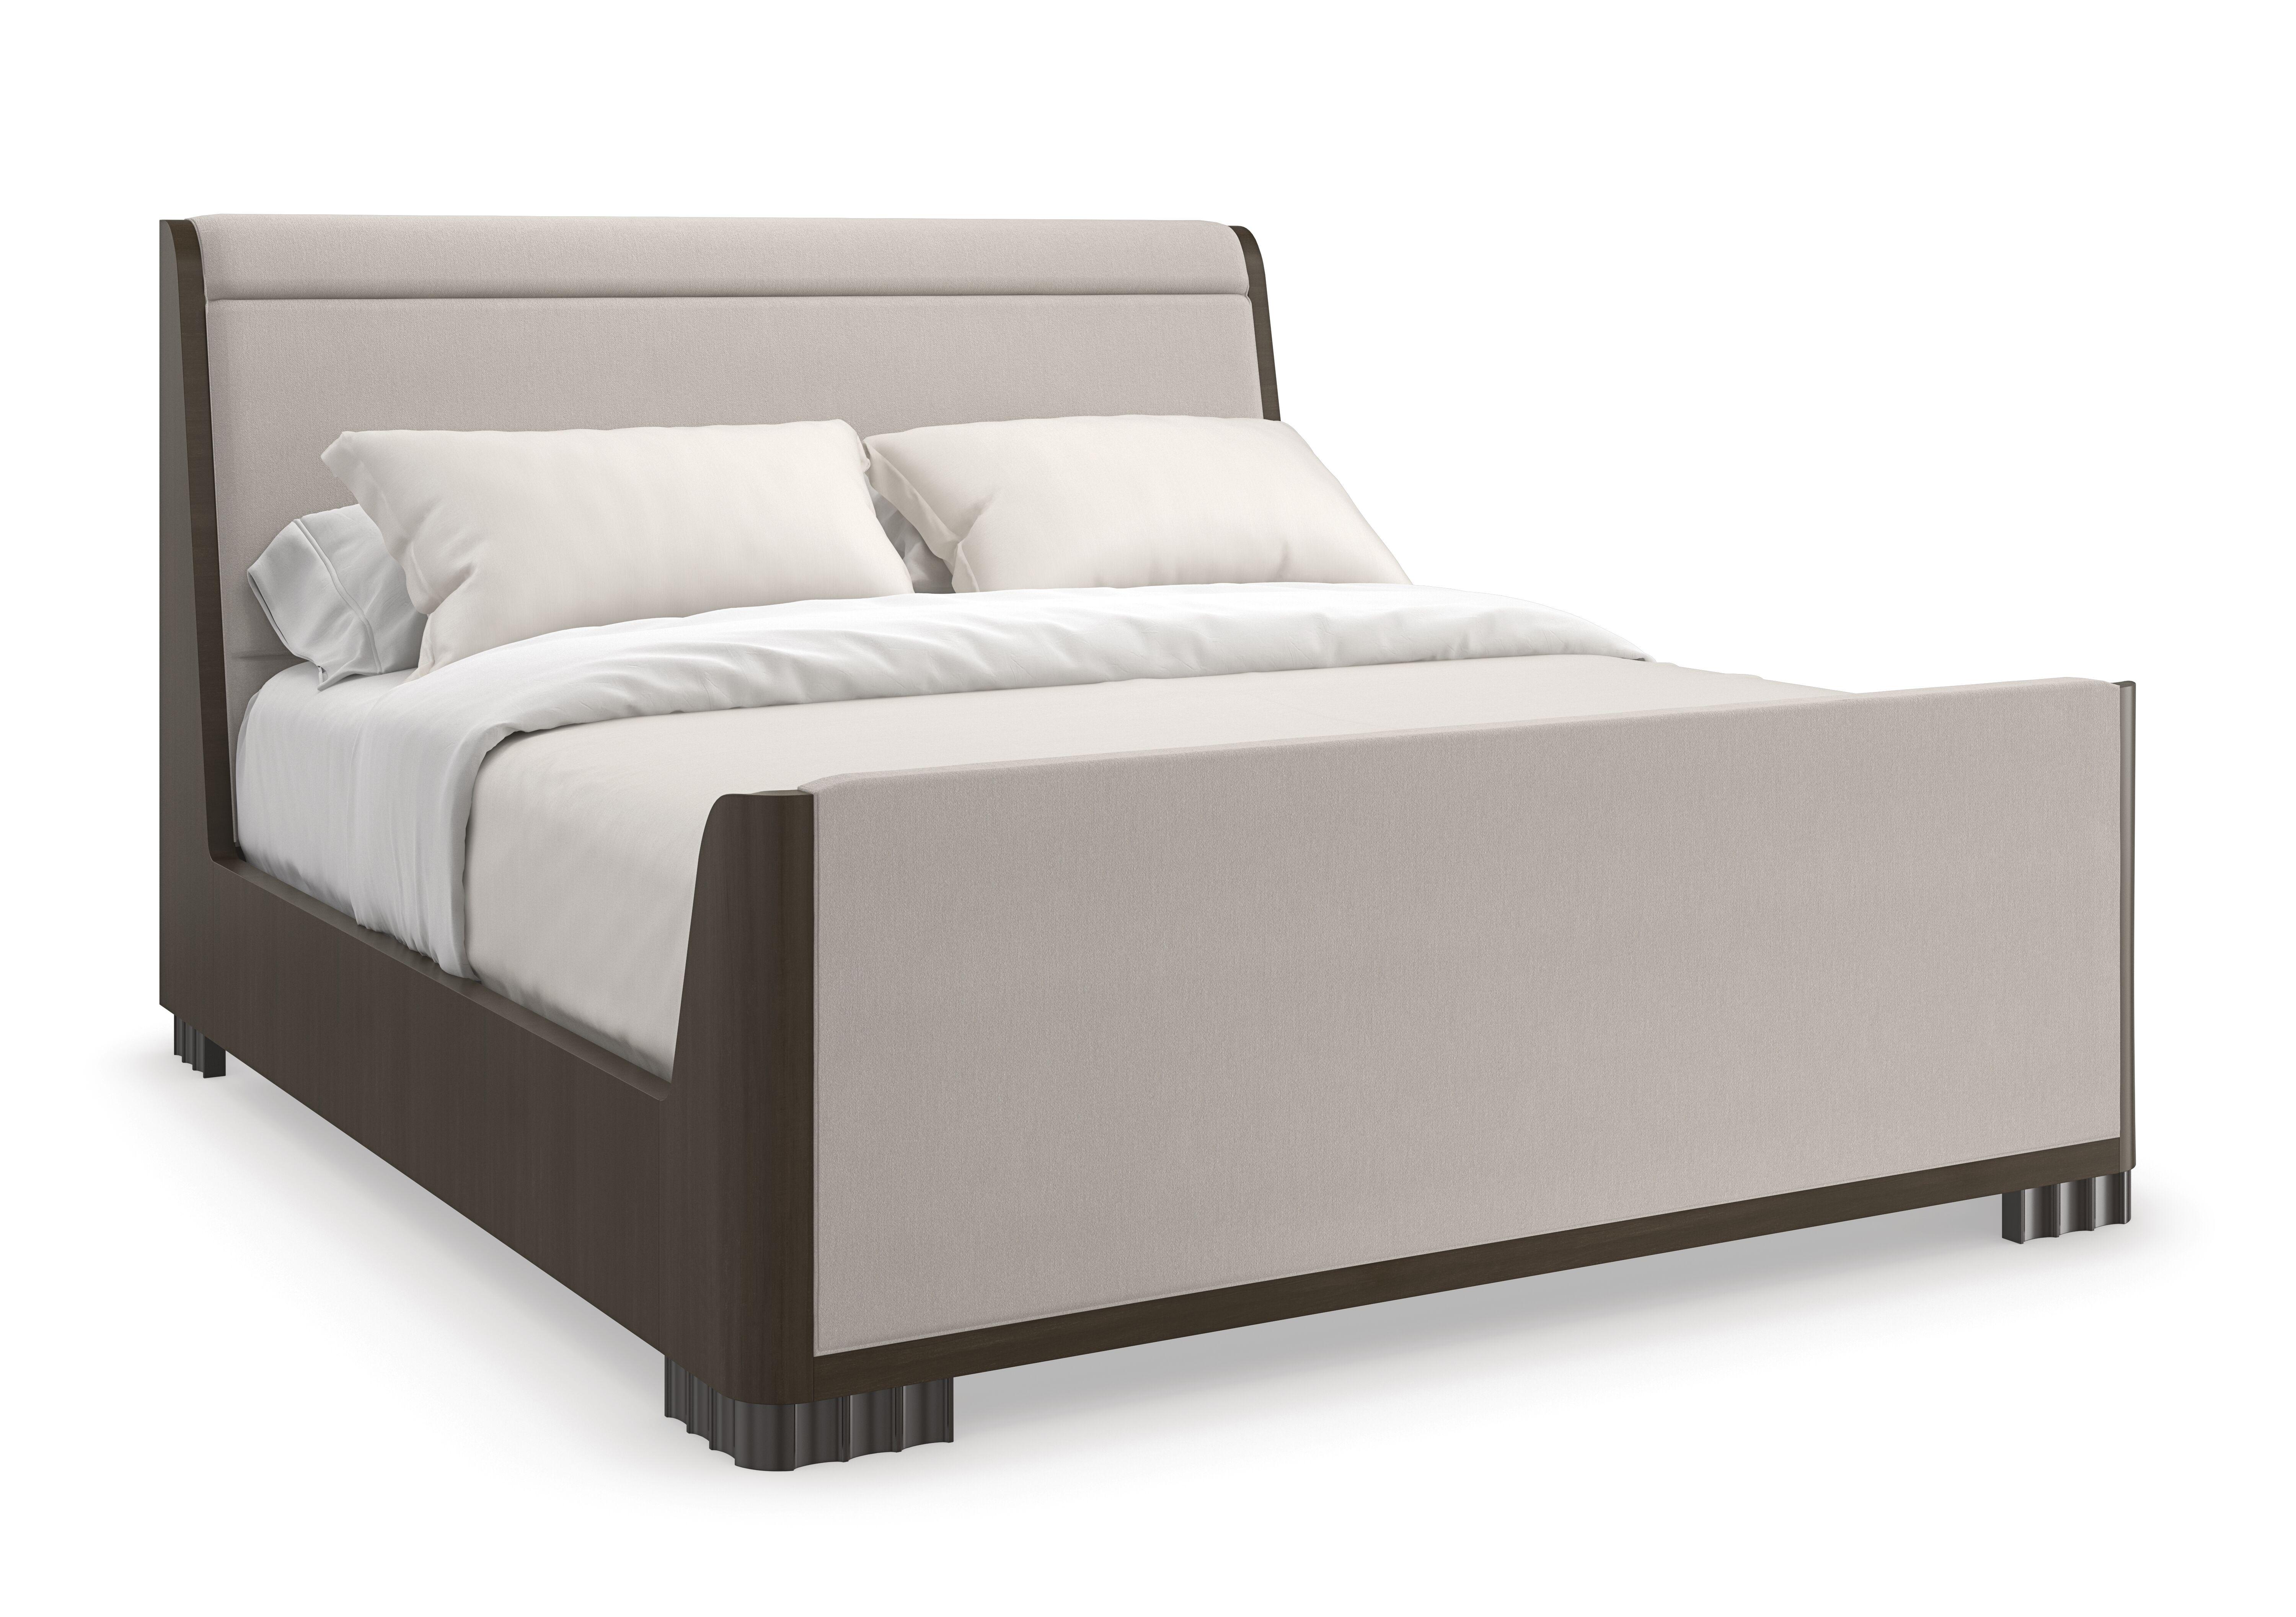 Contemporary Sleigh Bed SLOW WAVE CLA-423-123 in Light Gray, Dark Chocolate Fabric